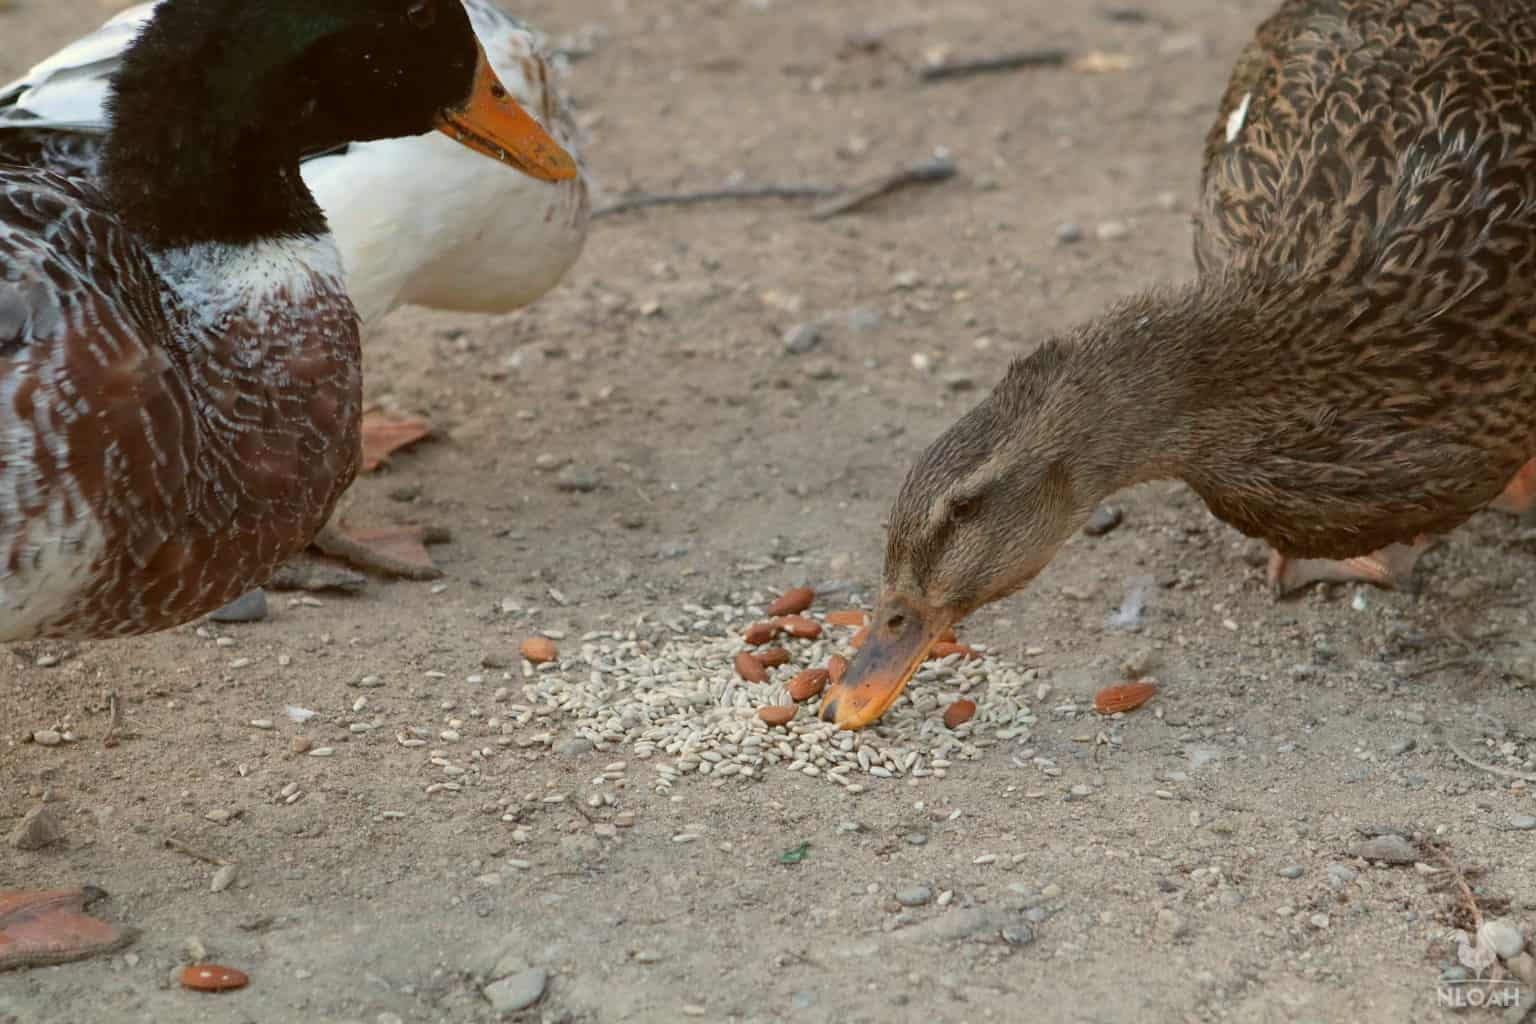 ducks eating sunflower seeds and almond